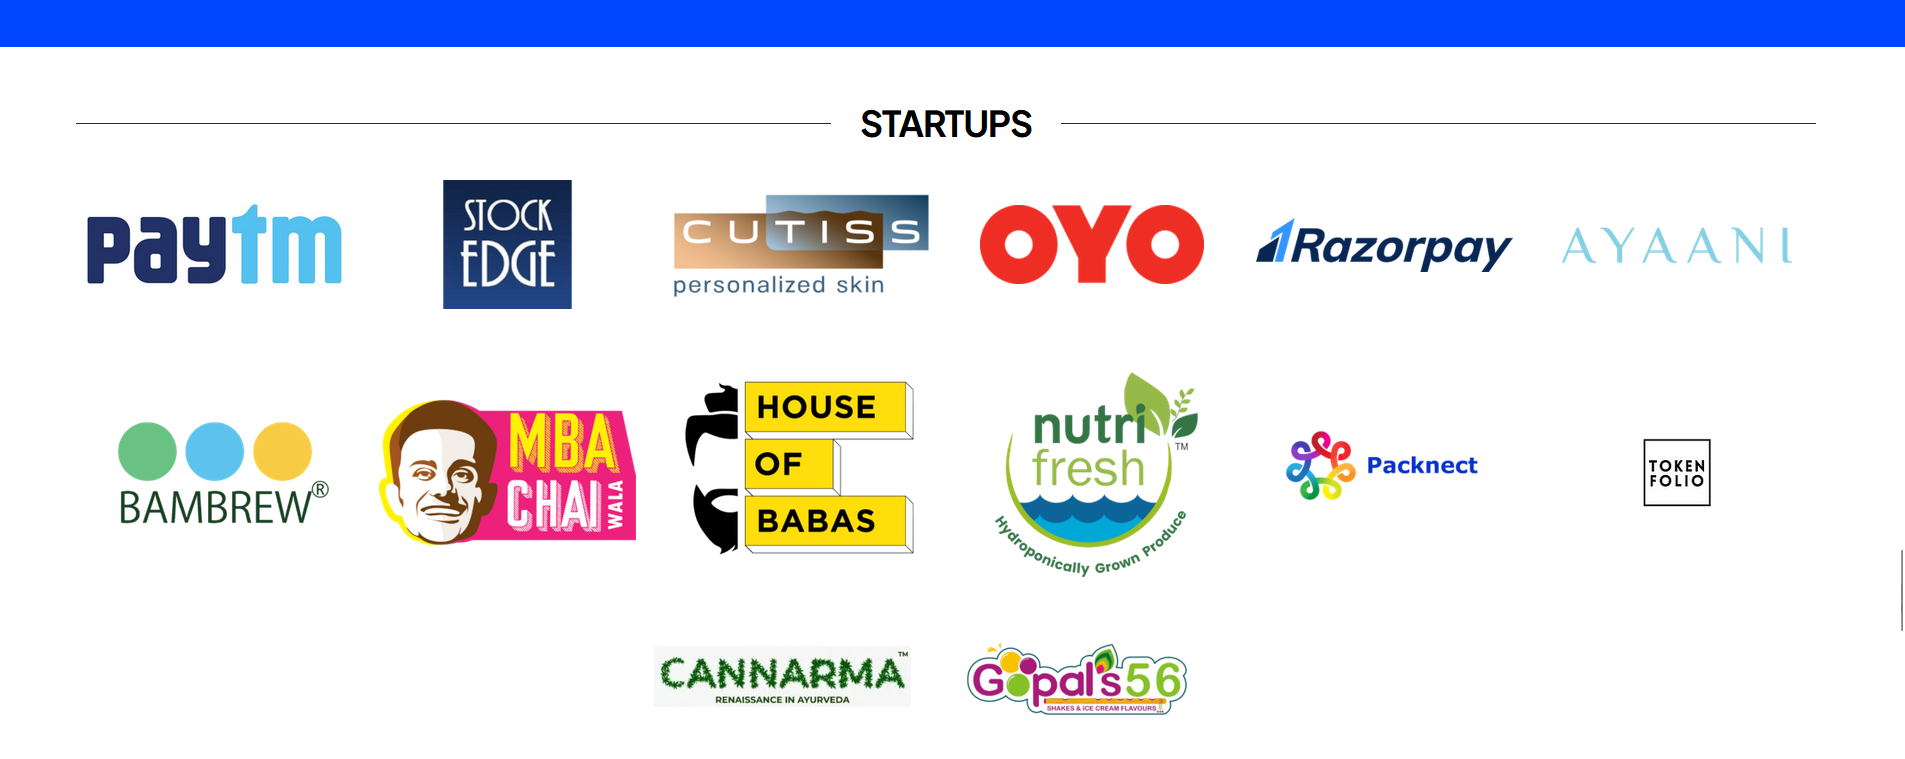 The World Startup Convention Claimed Startup Partners Such As OYO And Paytm